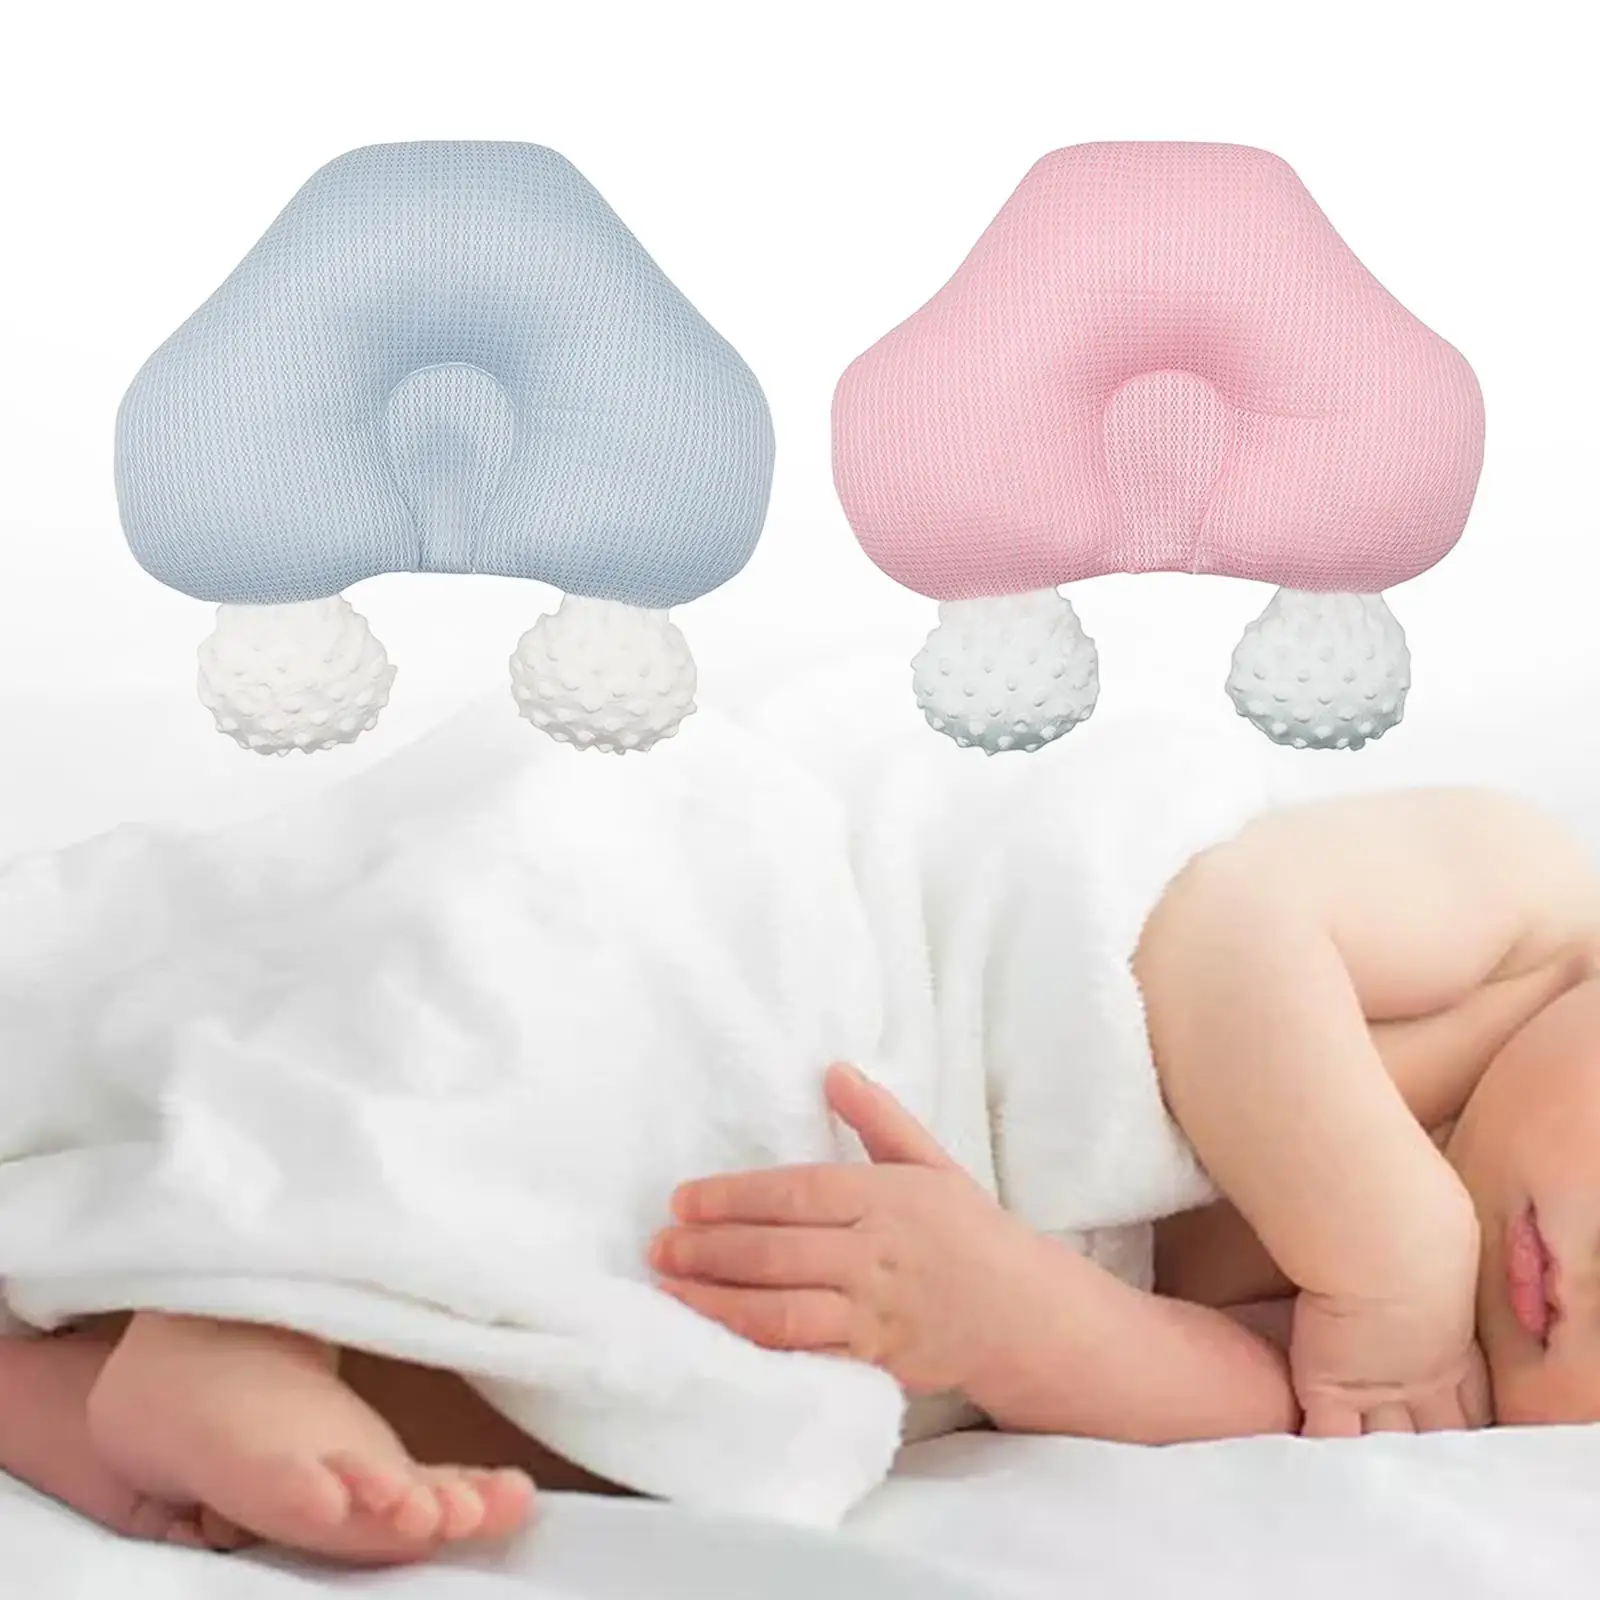 Ergonomic Baby Travel Pillow Baby Feeding Pillows Anti Rollover Head Protection Portable Breathable Soft Comfortable Adjustable